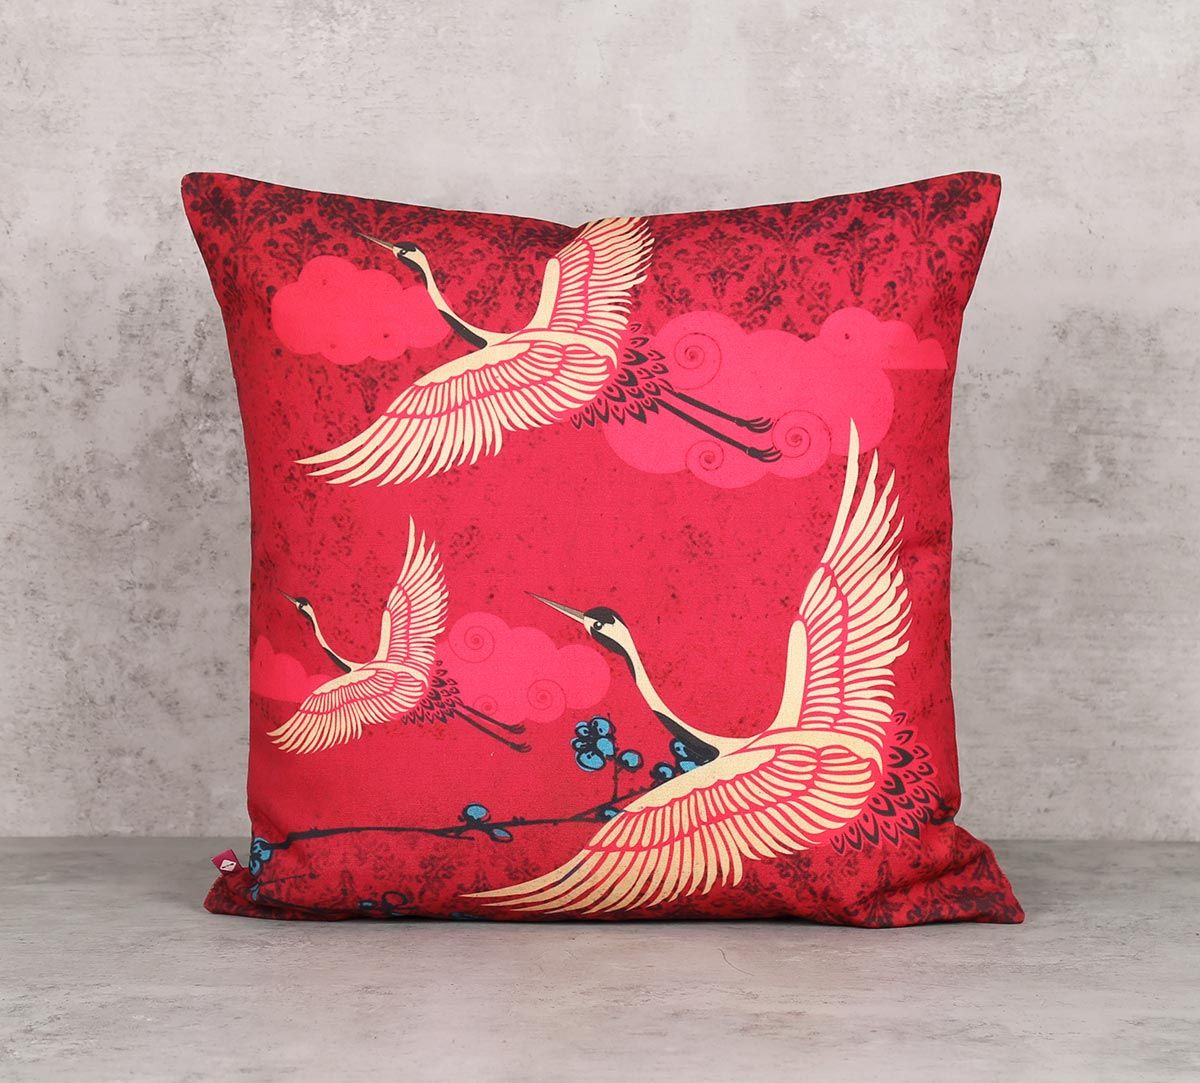 India Circus Legend Of The Cranes Canvas Blend 16 x 16 Cushion Cover